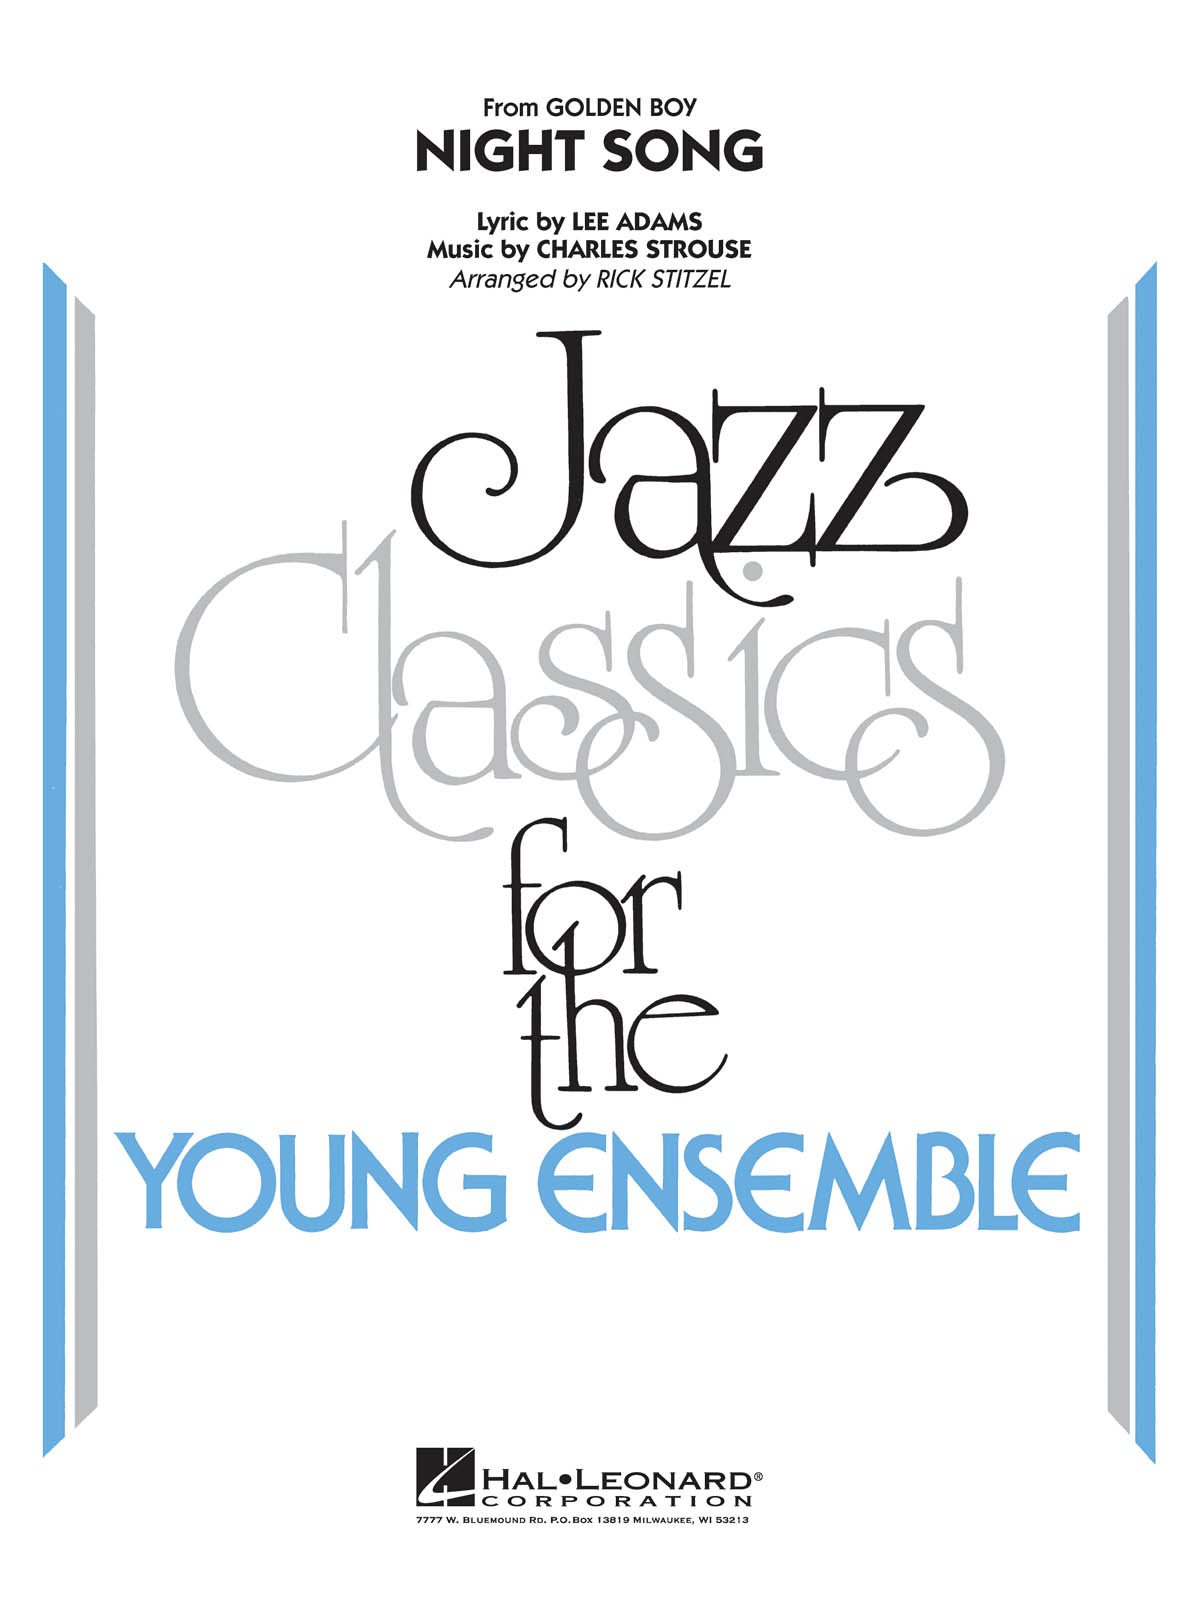 Charles Strouse: Night Song (from Golden Boy): Jazz Ensemble: Score & Parts